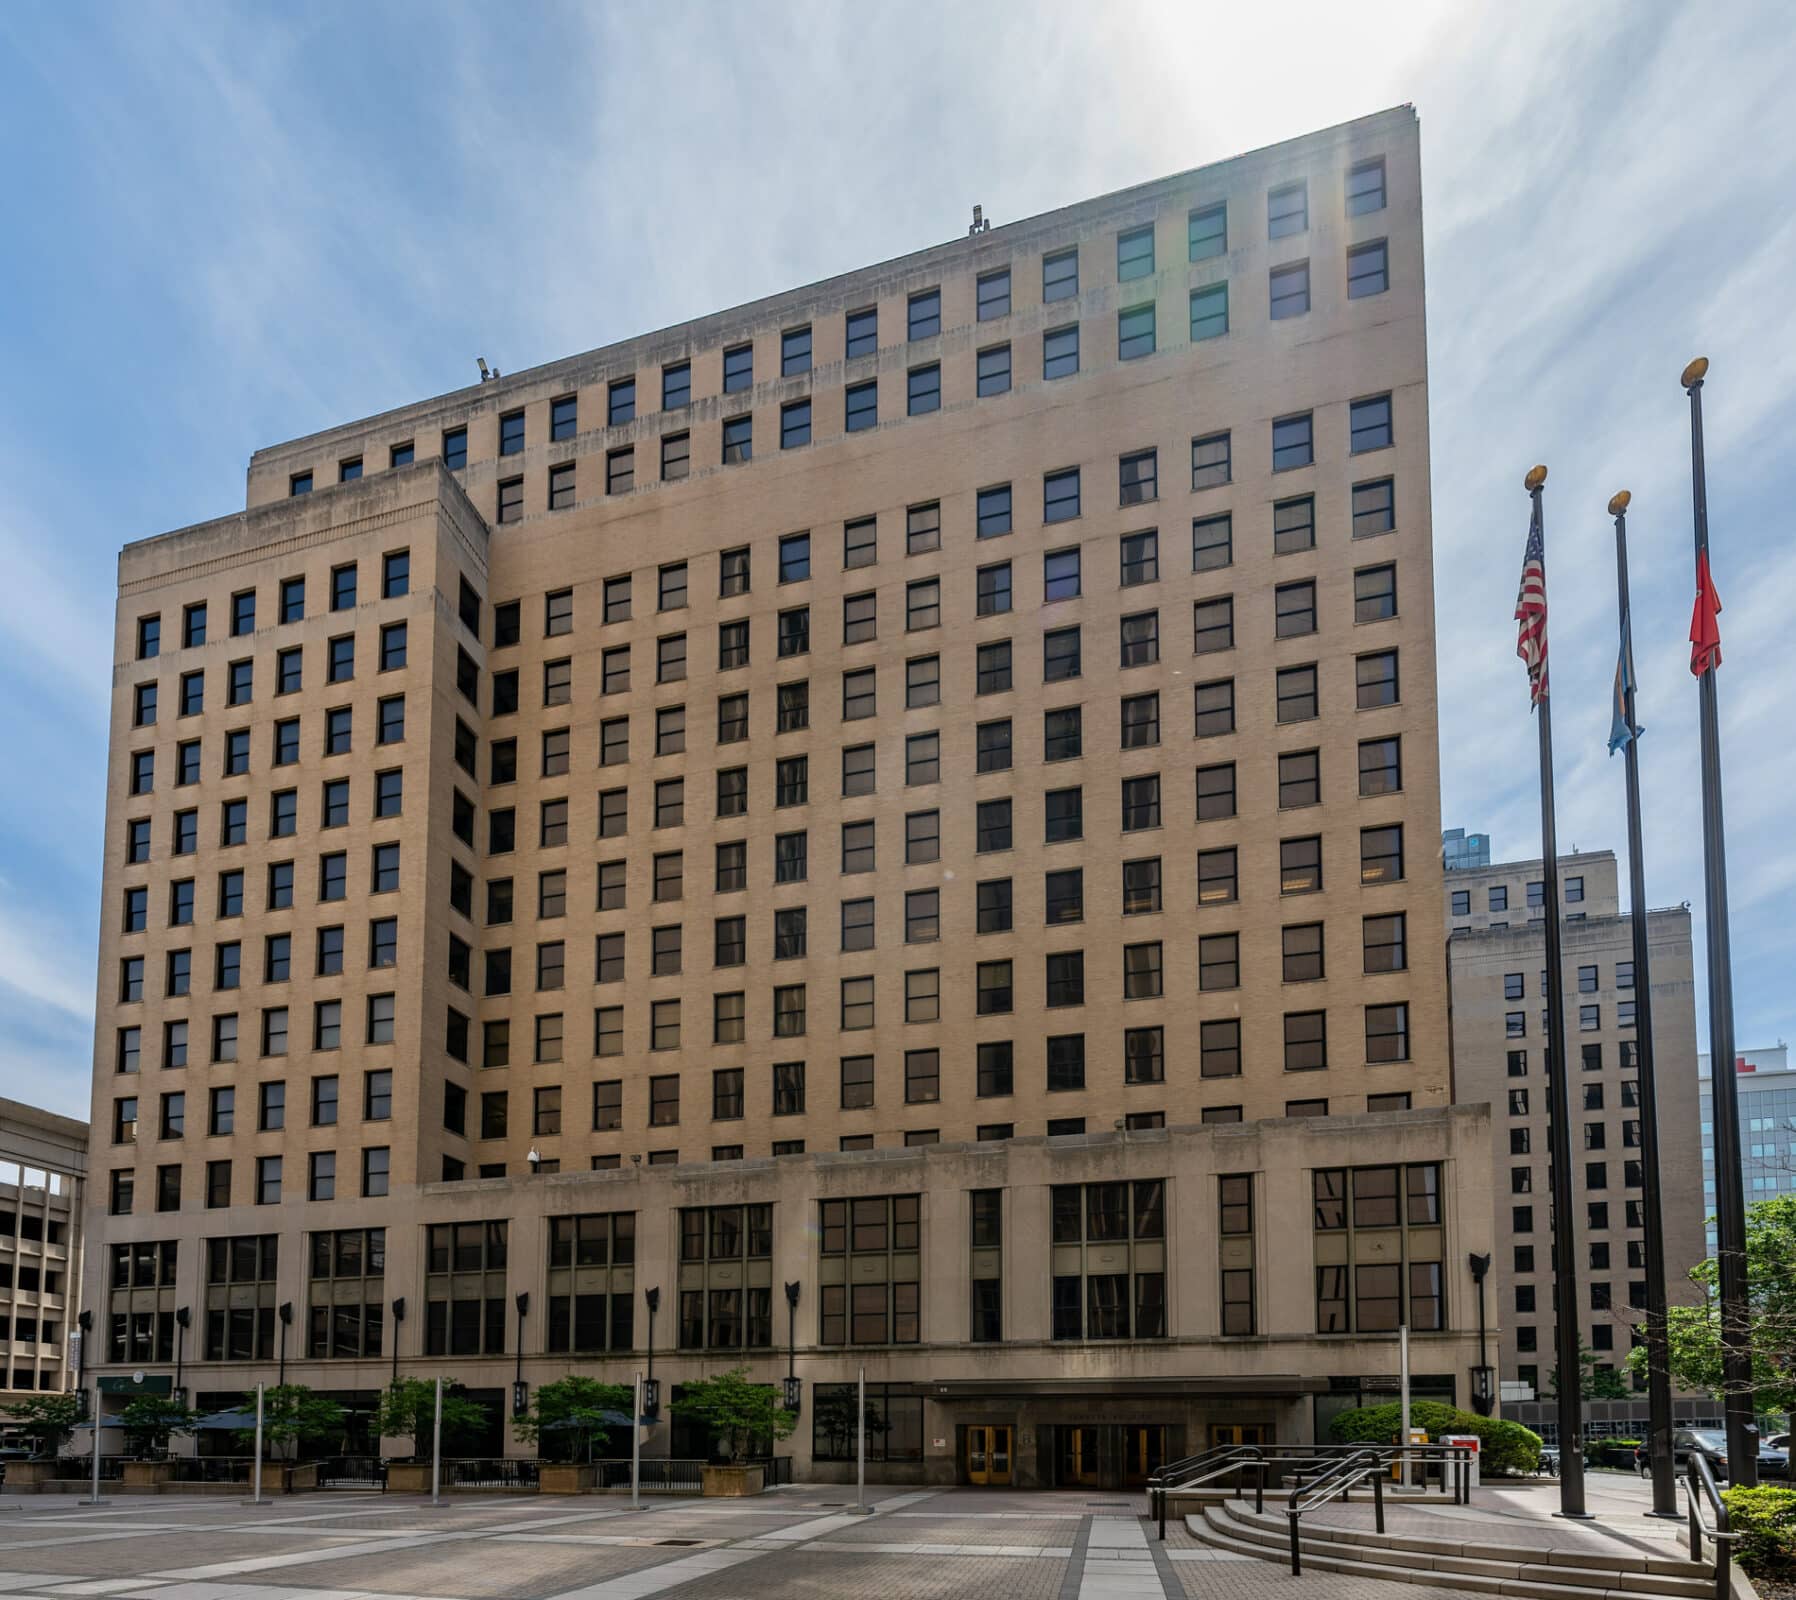 BPG Featured in Philadelphia Business Journal: $100M overhaul of former DuPont building continues Wilmington transformation